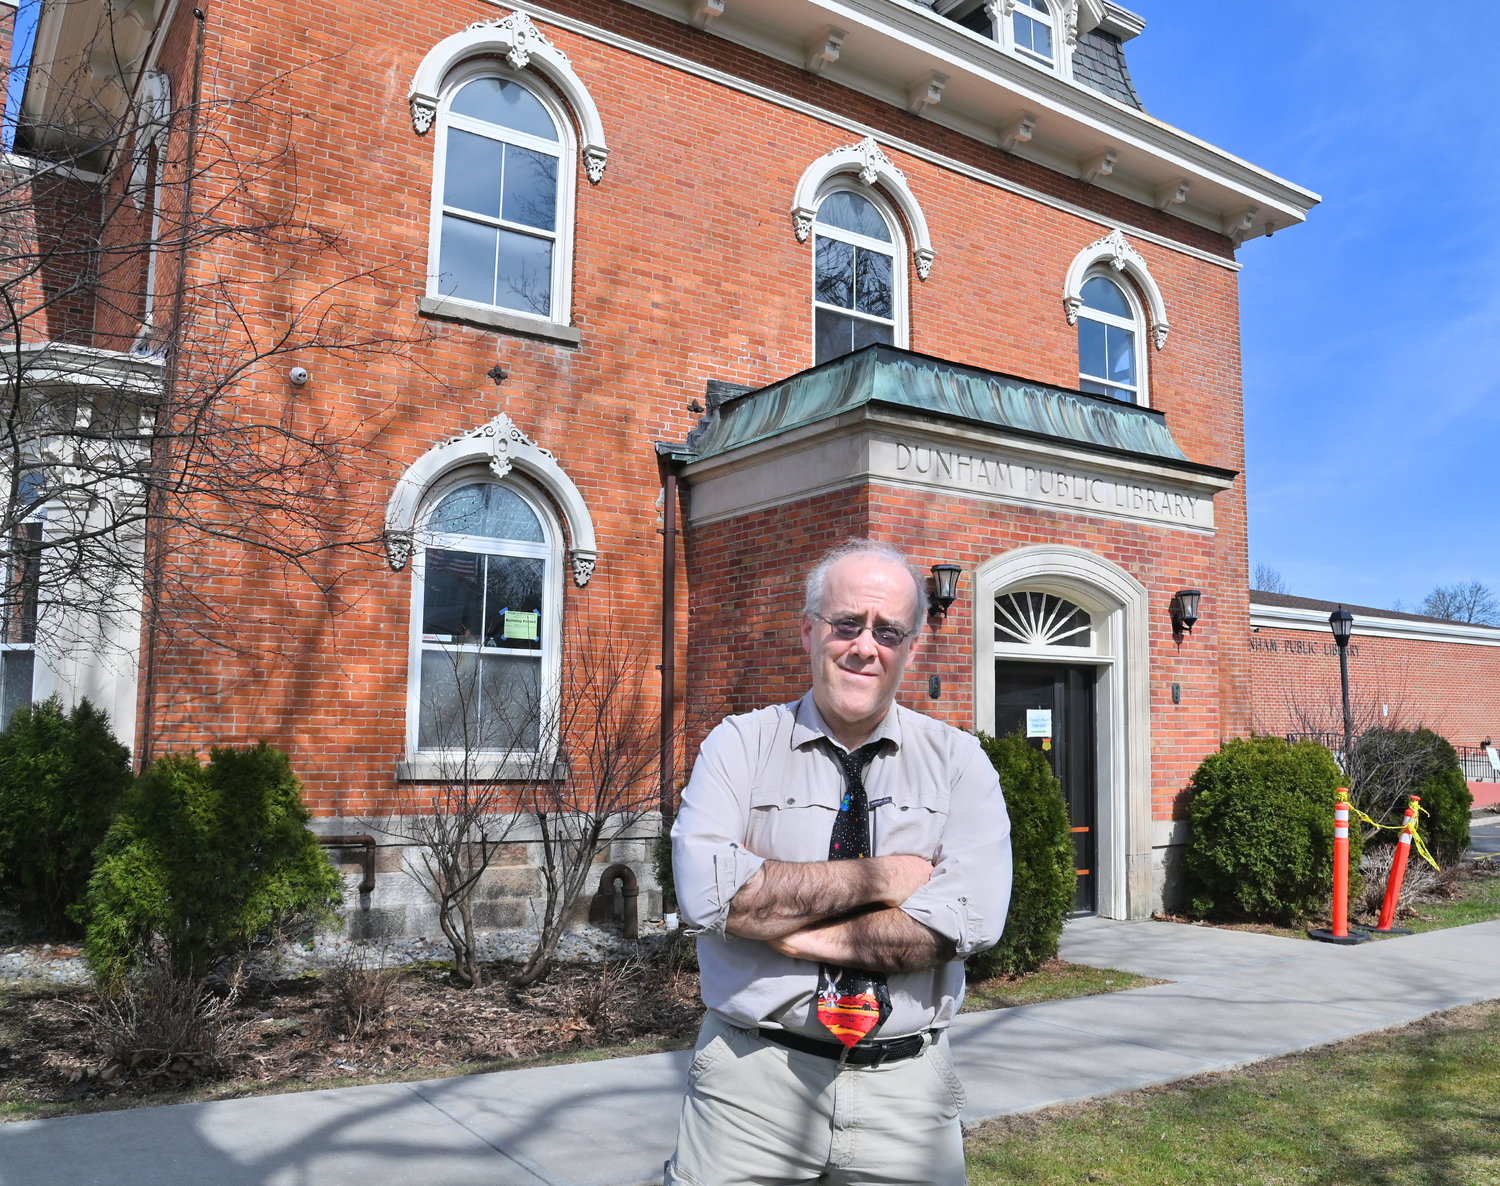 The Dunham Public Library, 76 Main St., shown with Adult Services Librarian Dennis Kininger in this file photo from earlier this year, dates back to the pre-Civil War era and became a library in October 1926. The facility’s capital project has received $323,625 in state funding for the rehabilitation of Dunham House, including a bay window, toilet room, kitchenette, office dividing wall, technology and electrical work.